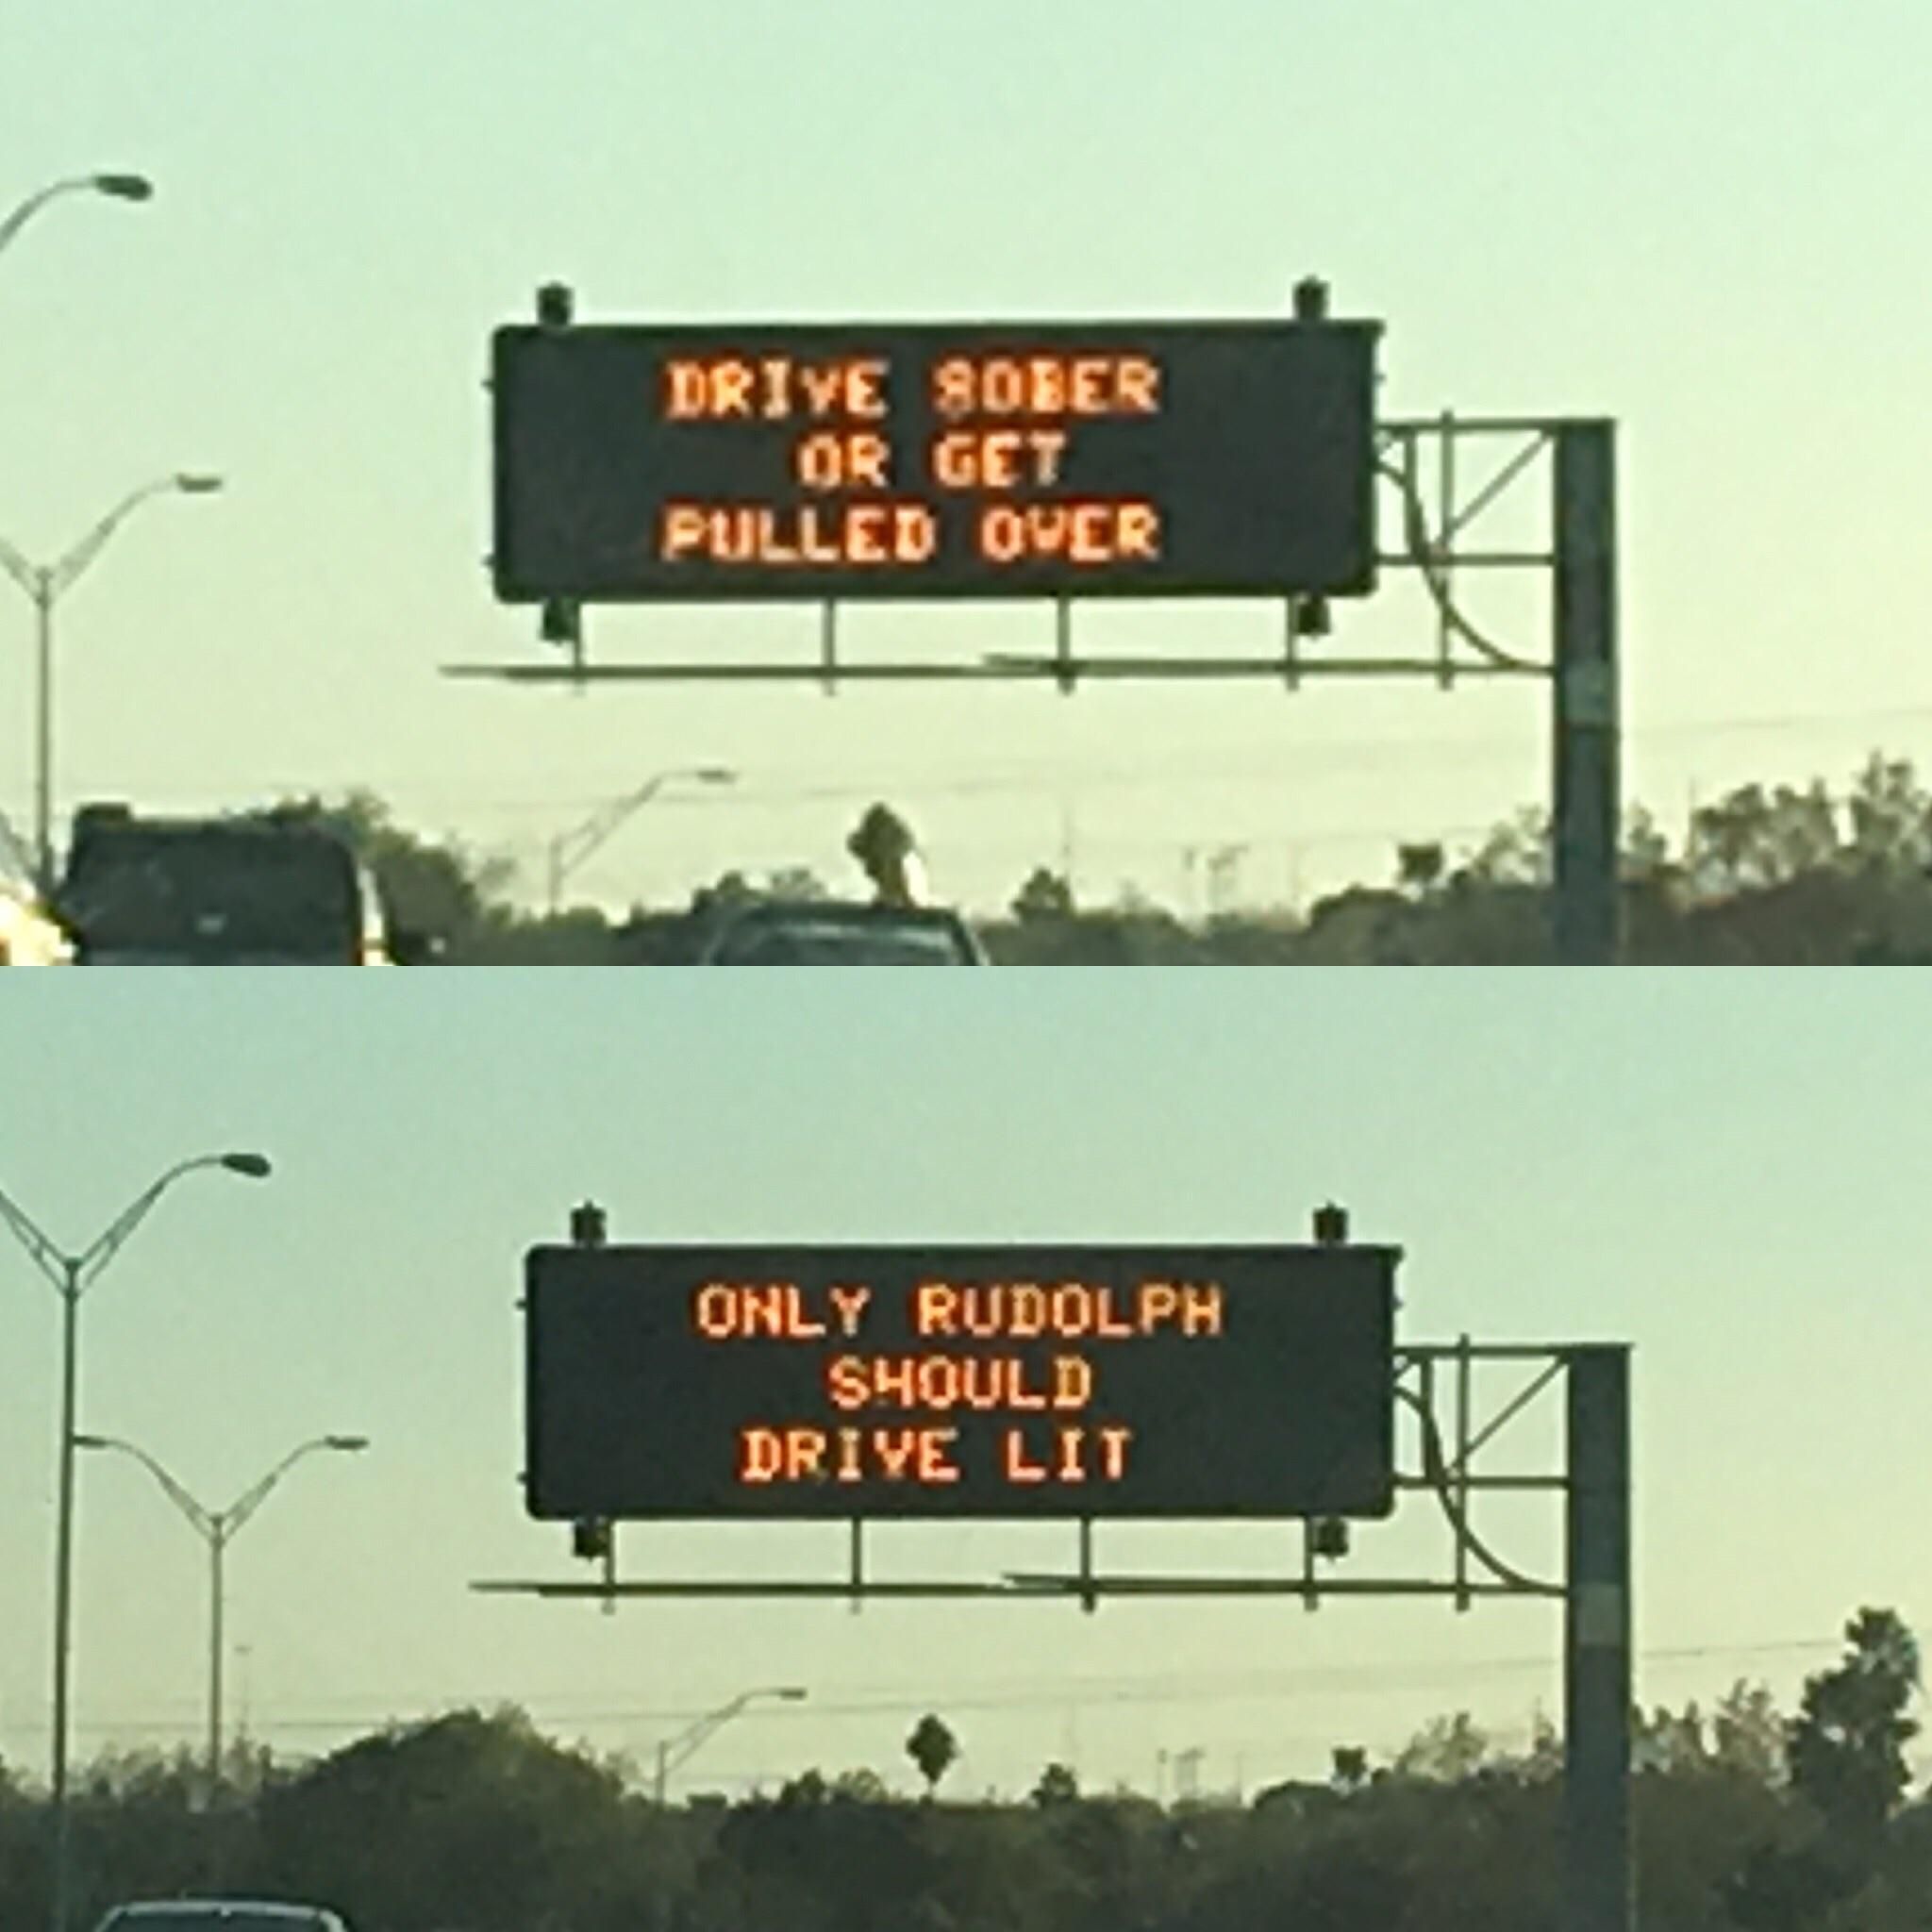 Merry Christmas from the Texas Department of Transportation!